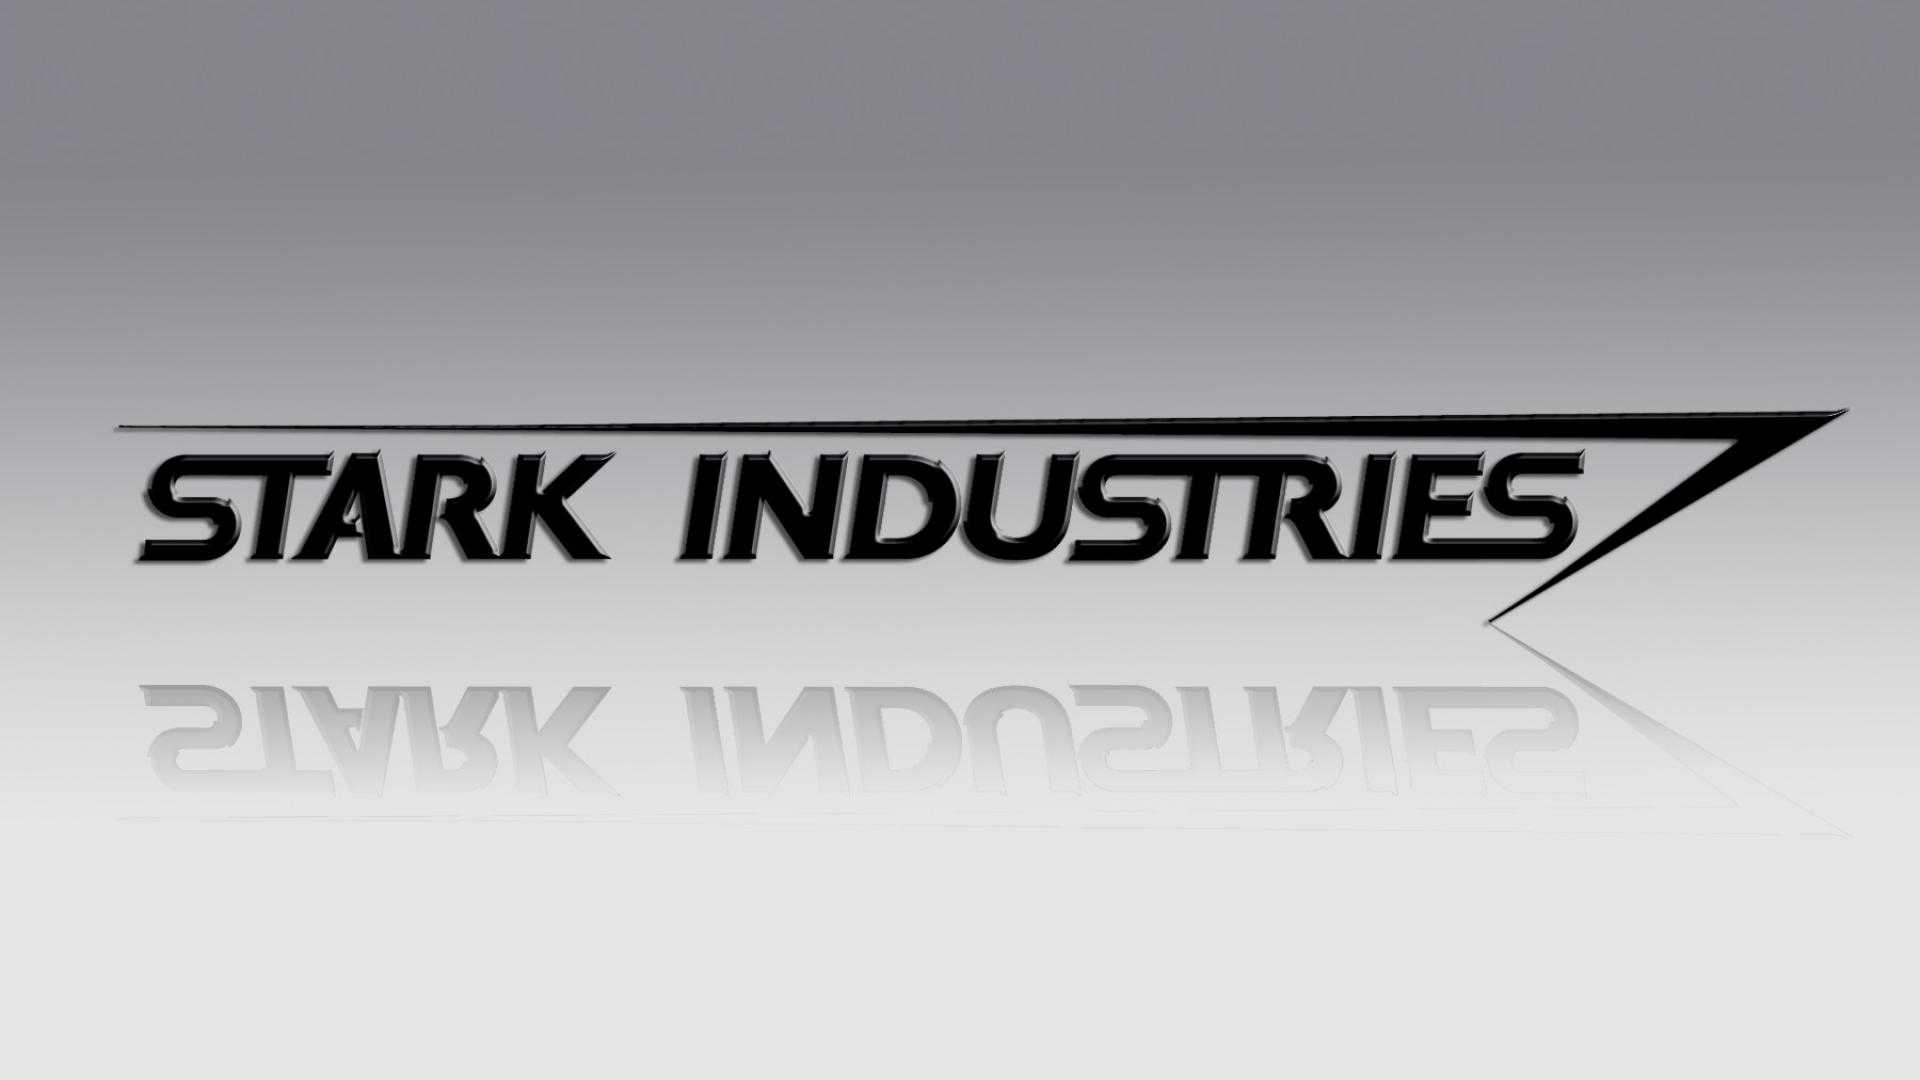 Stark Industries Wallpapers - KoLPaPer - Awesome Free HD Wallpapers.